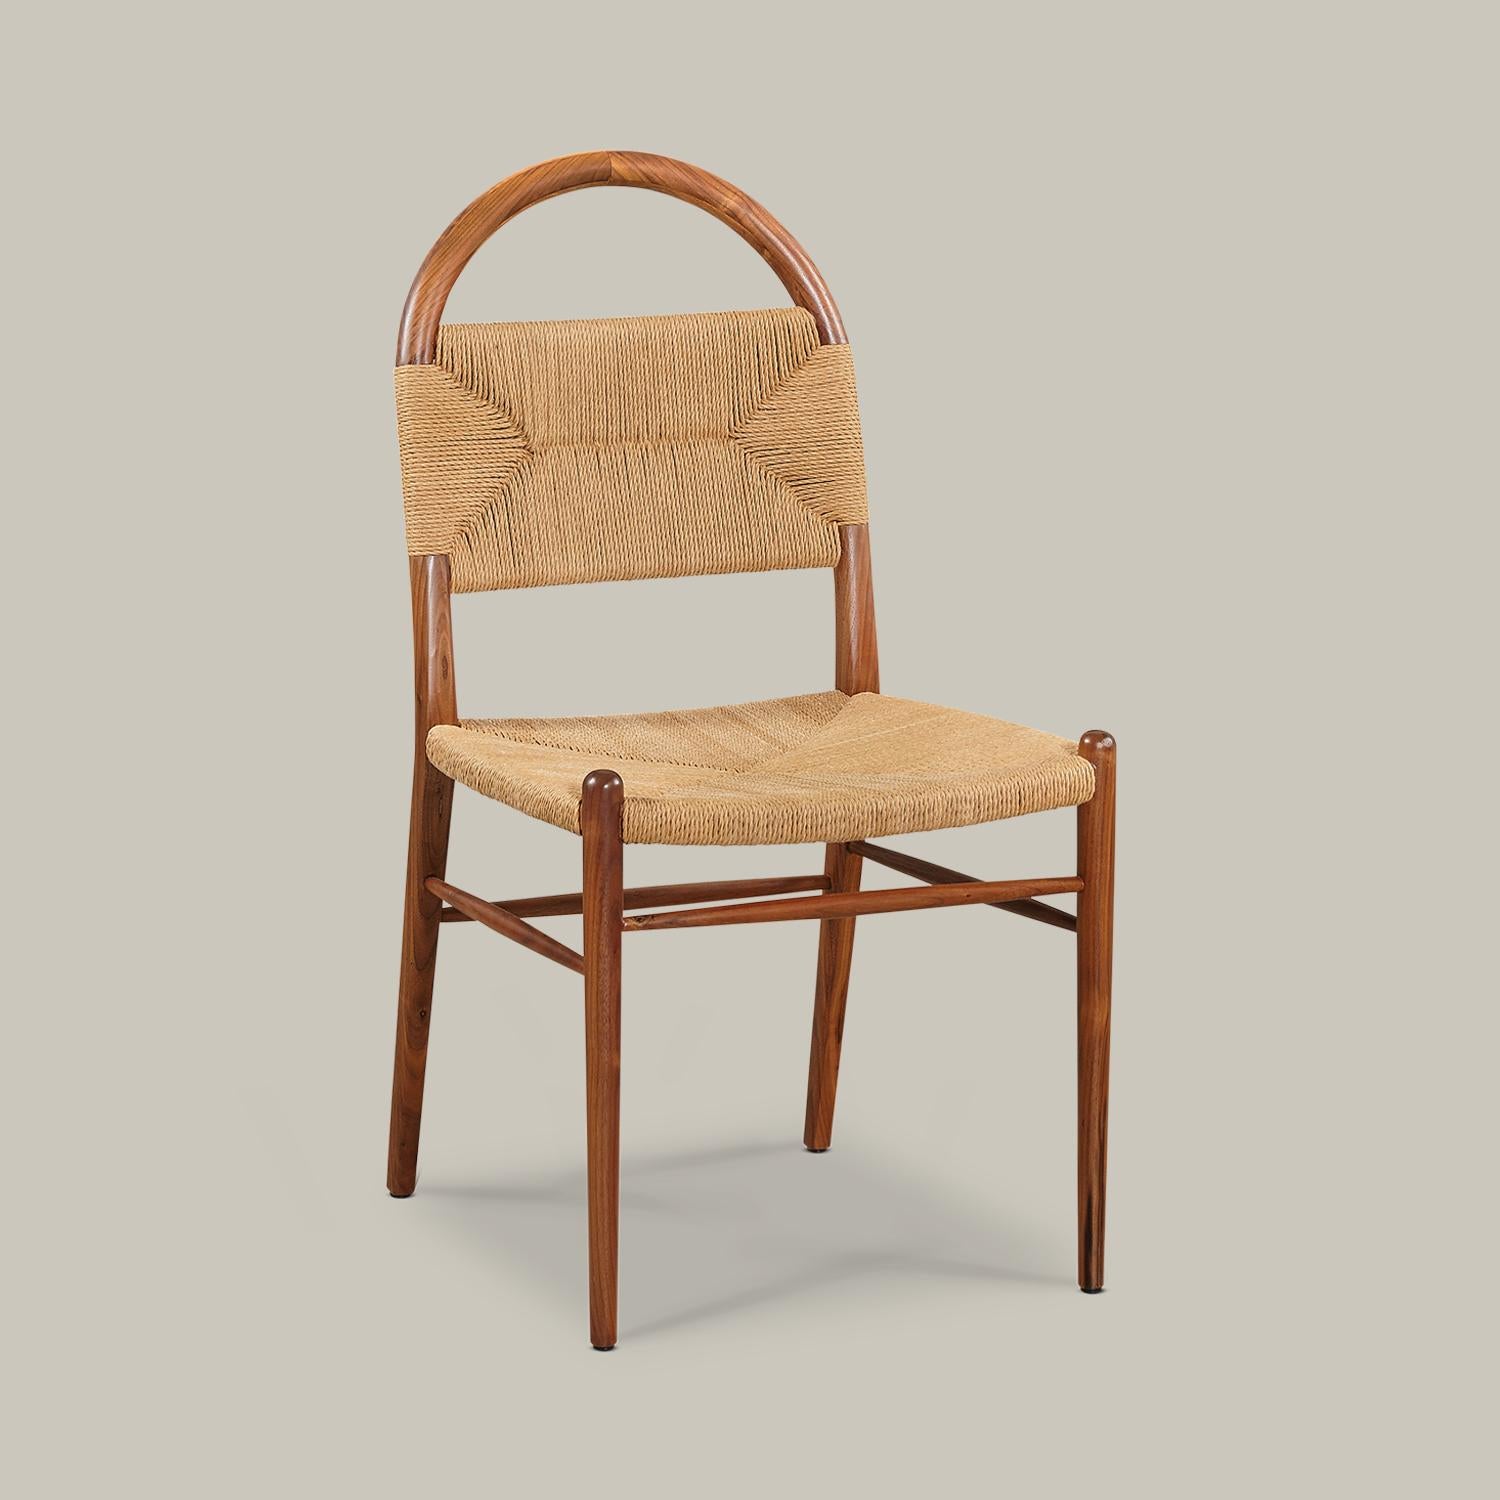 A solid wood arched frame threads through a woven rush seat with arms and backrest to form this well-proportioned, minimalist chair for dining, desk, vanity or an accent in any room. Handmade by artisans in Vietnam, this piece is a casual contrast